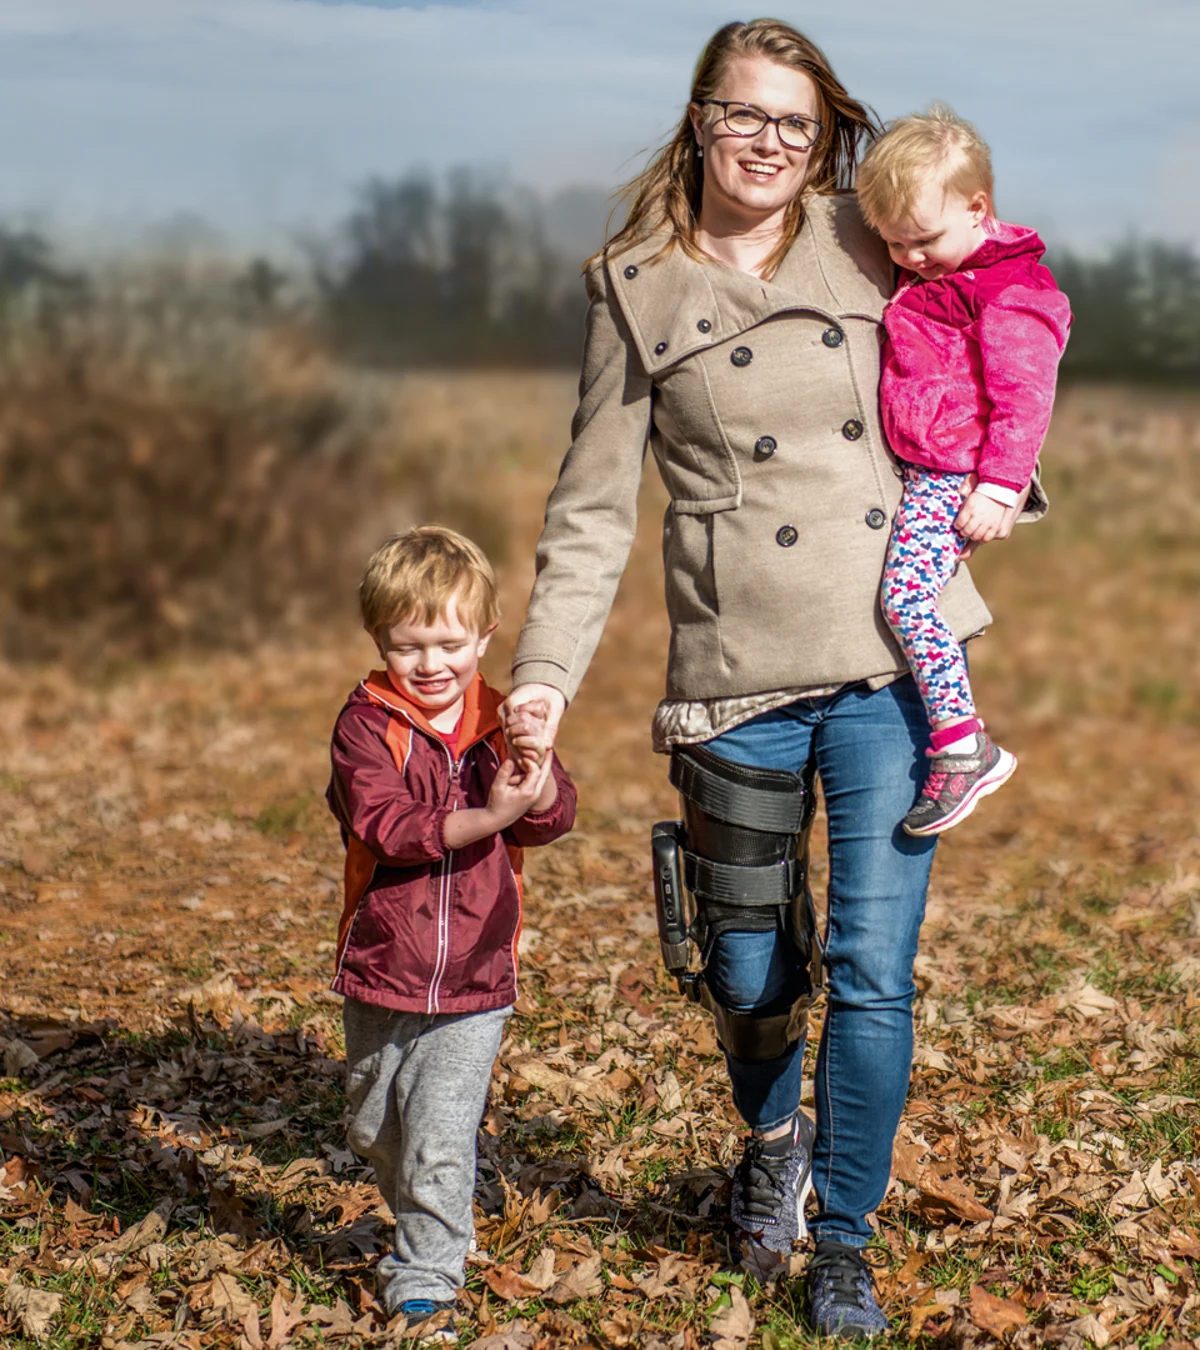 A mother holds one child while holding hands with another as they stroll outside through a field. The mother is wearing the Ottobock's C-Brace.